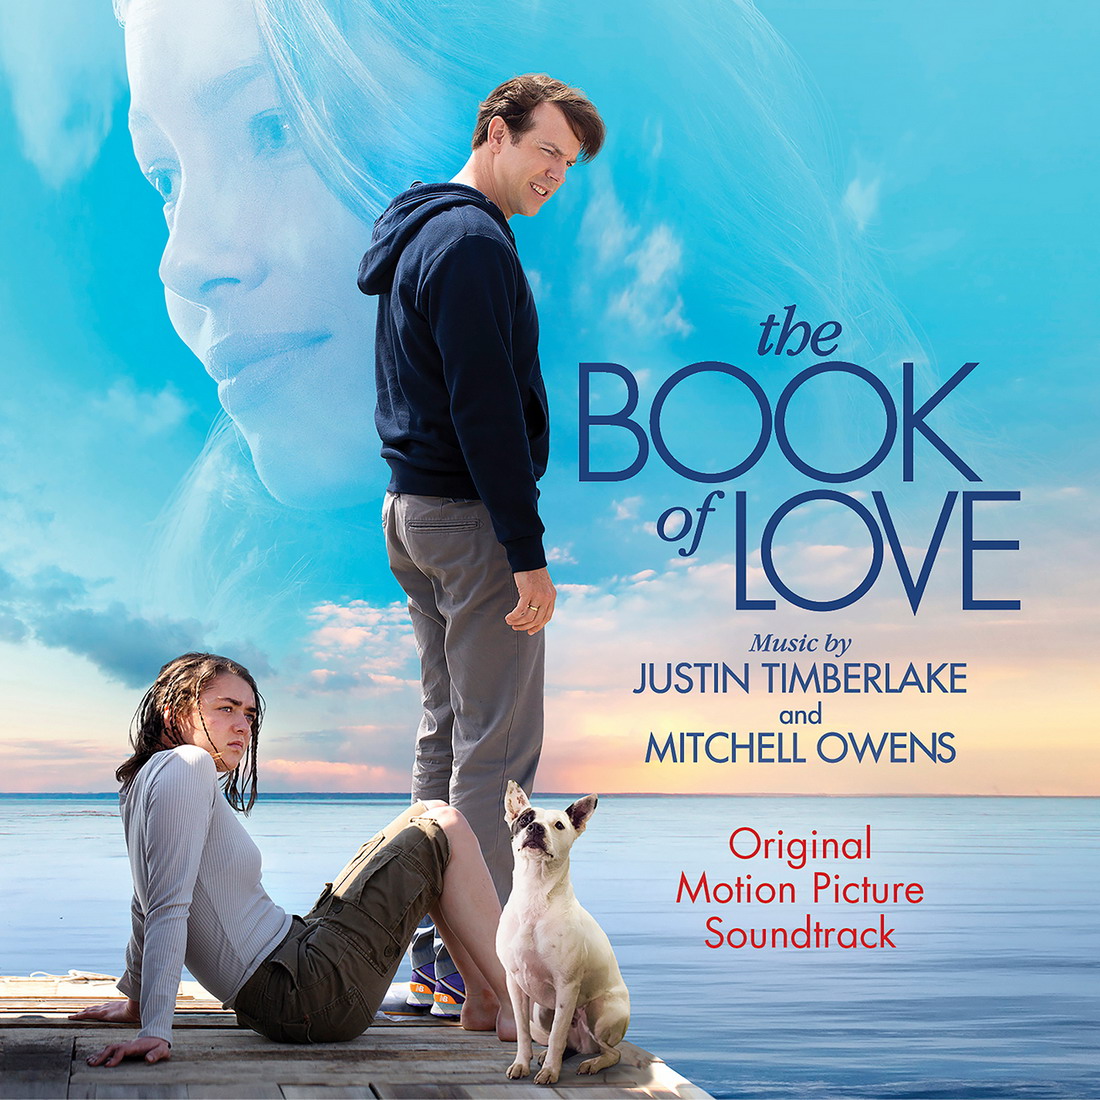 Justin timberlake mitchell Owens-the book of love original motion picture soundtrack-soundtrack-Sony Music Entertainment